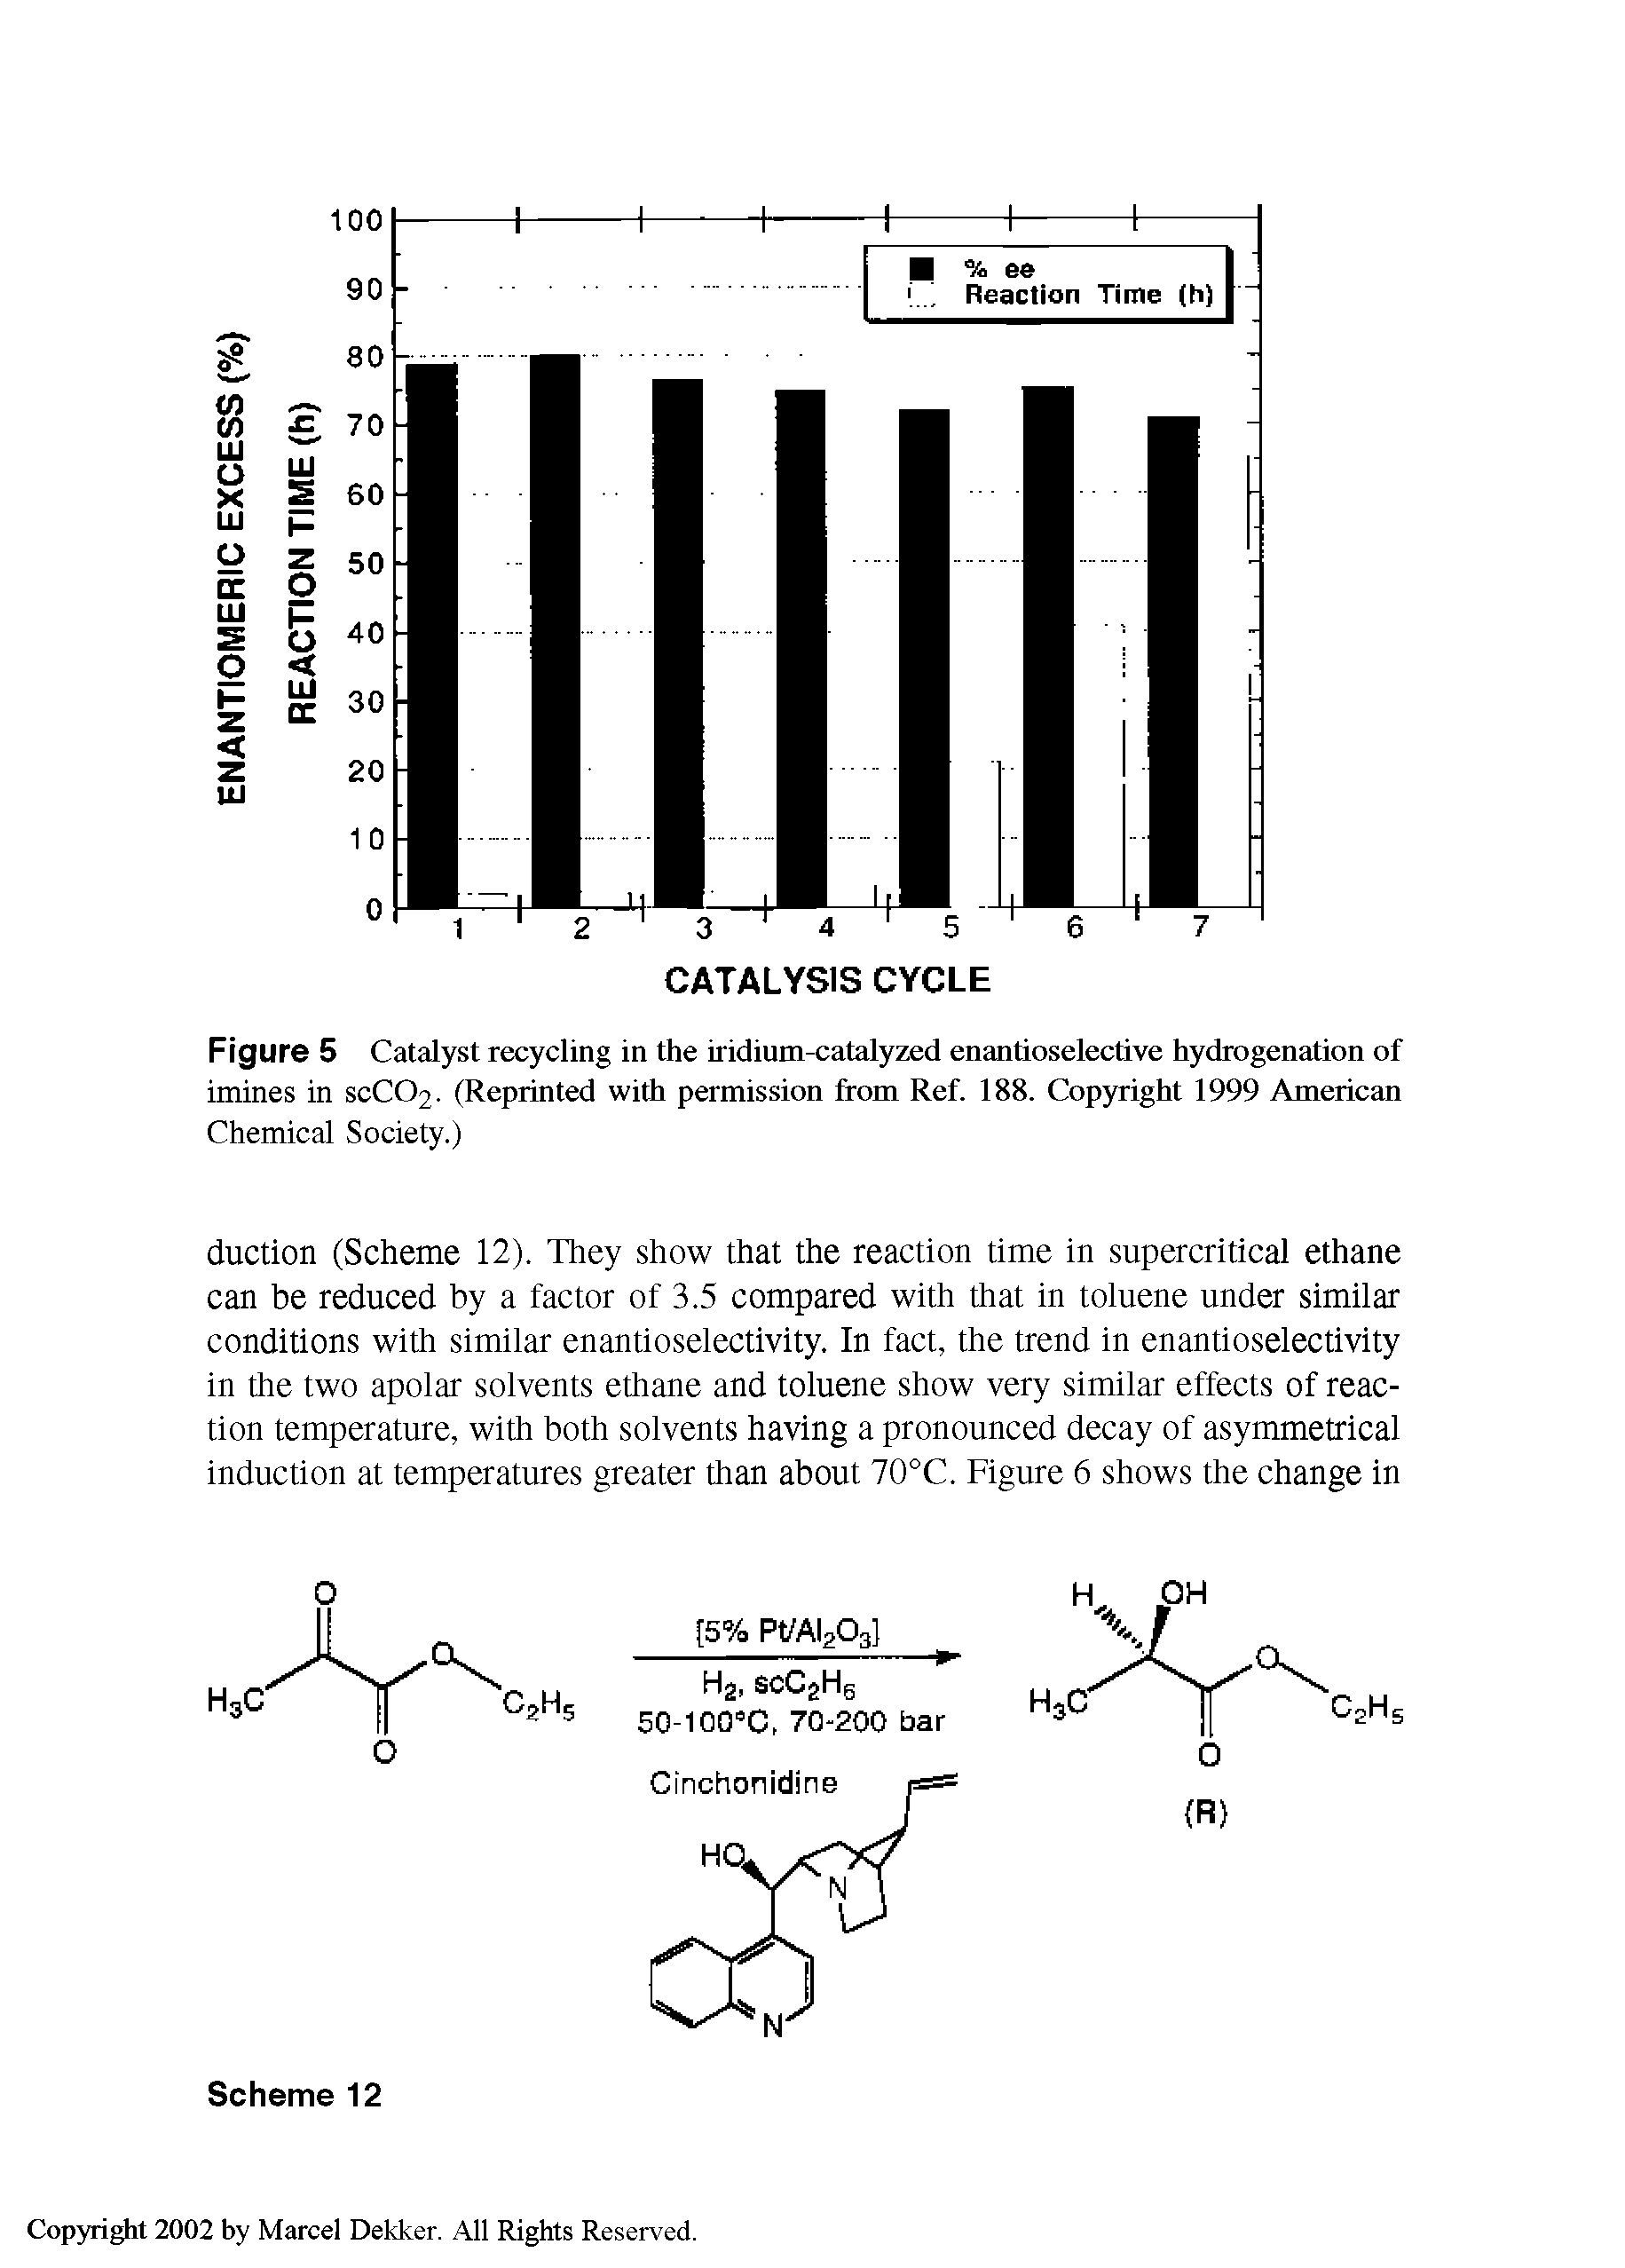 Figure 5 Catalyst recycling in the iridium-catalyzed enantioselective hydrogenation of imines in SCCO2. (Reprinted with permission from Ref. 188. Copyright 1999 American Chemical Society.)...